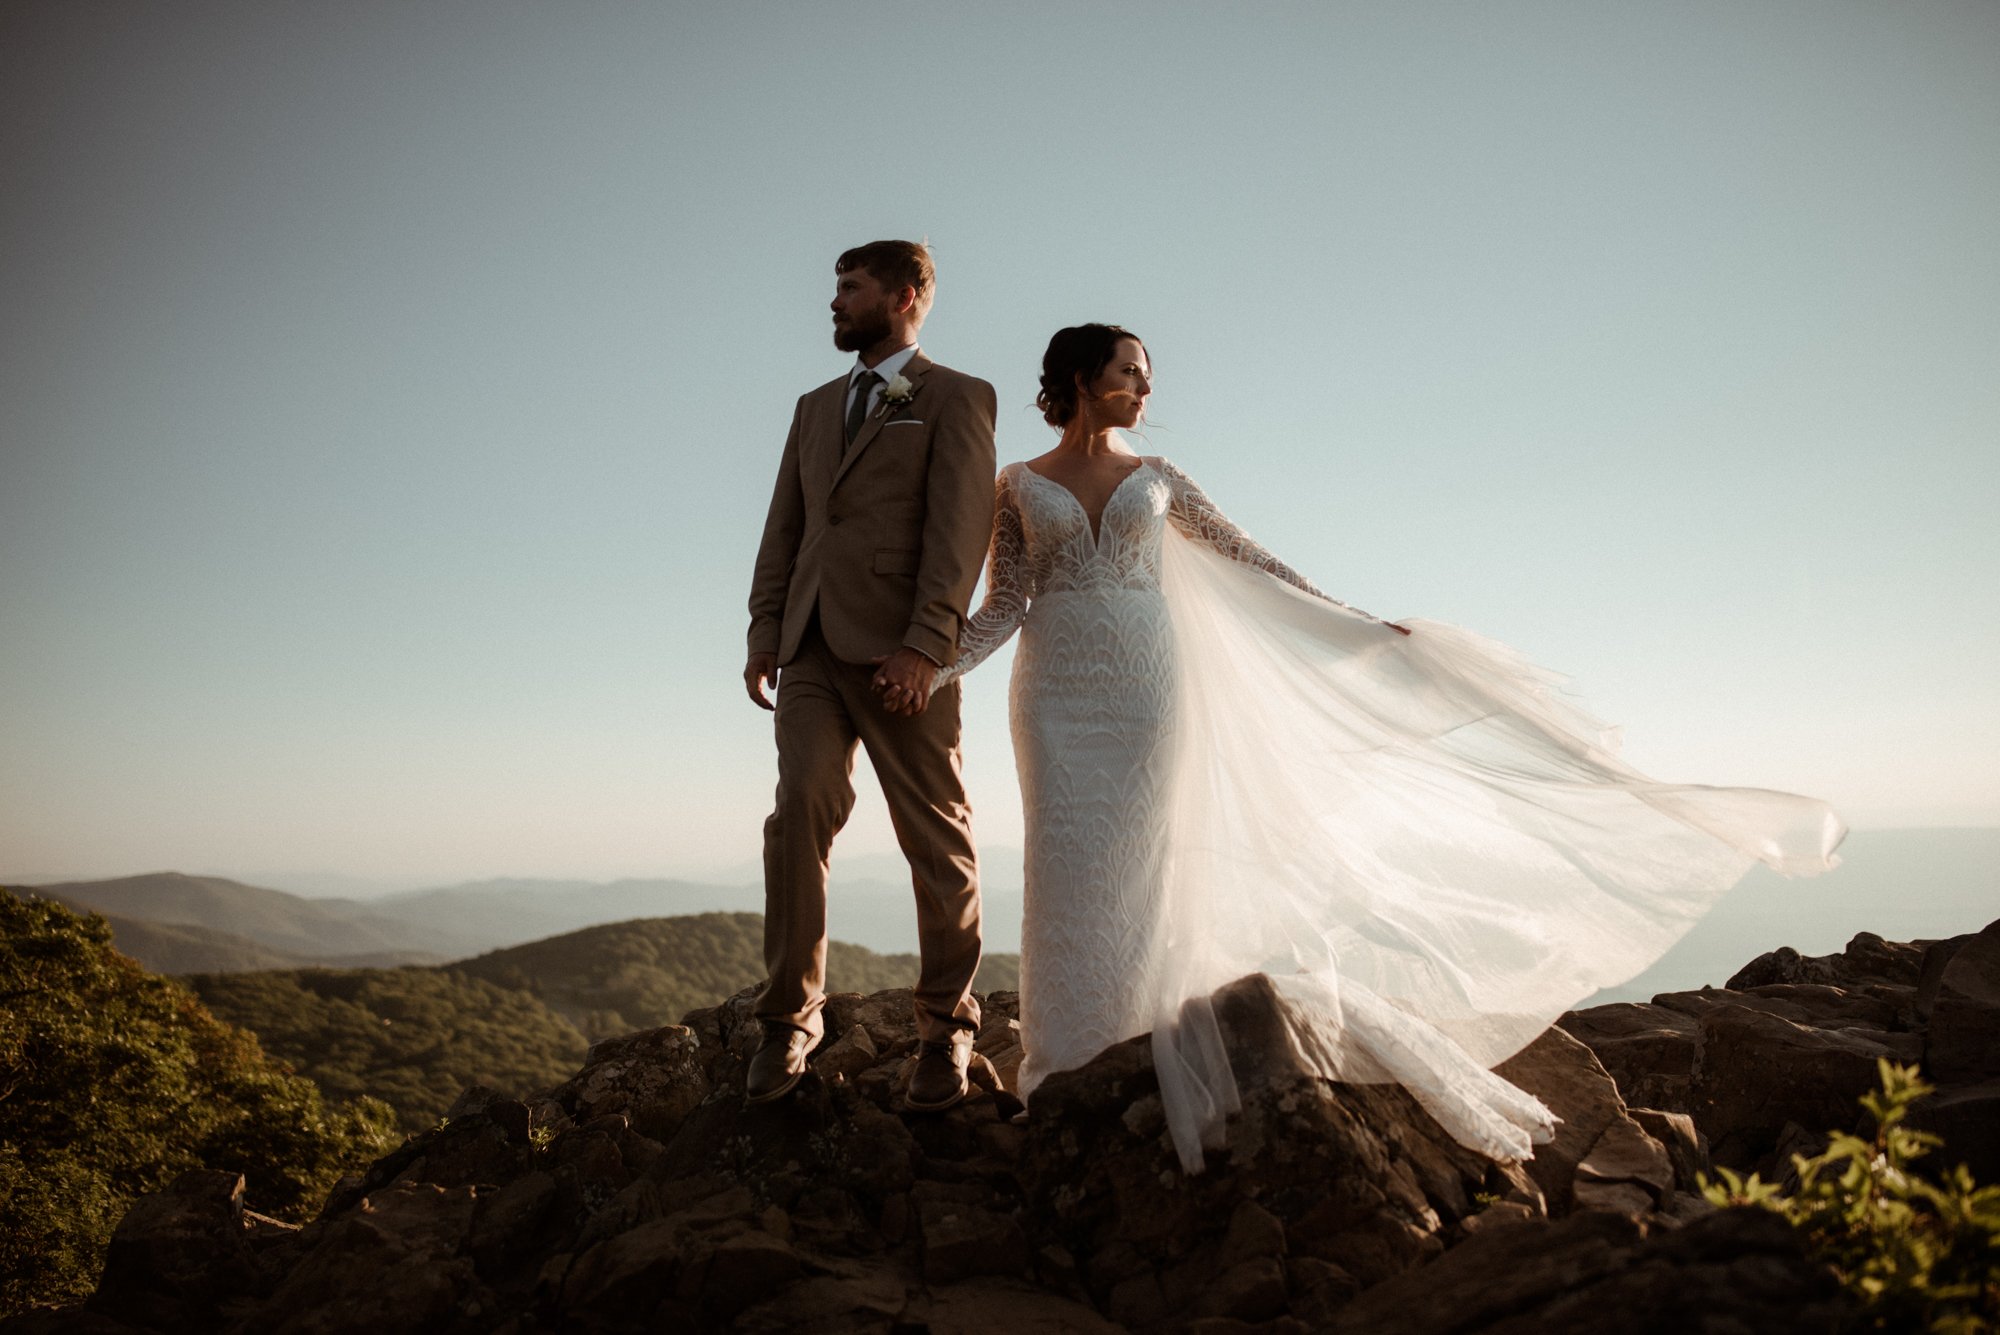 Sunset Elopement on Stony Man Summit in Shenandoah National Park - White Sails Creative Elopement Photography - July Elopement on the Blue Ridge Parkway_61.jpg